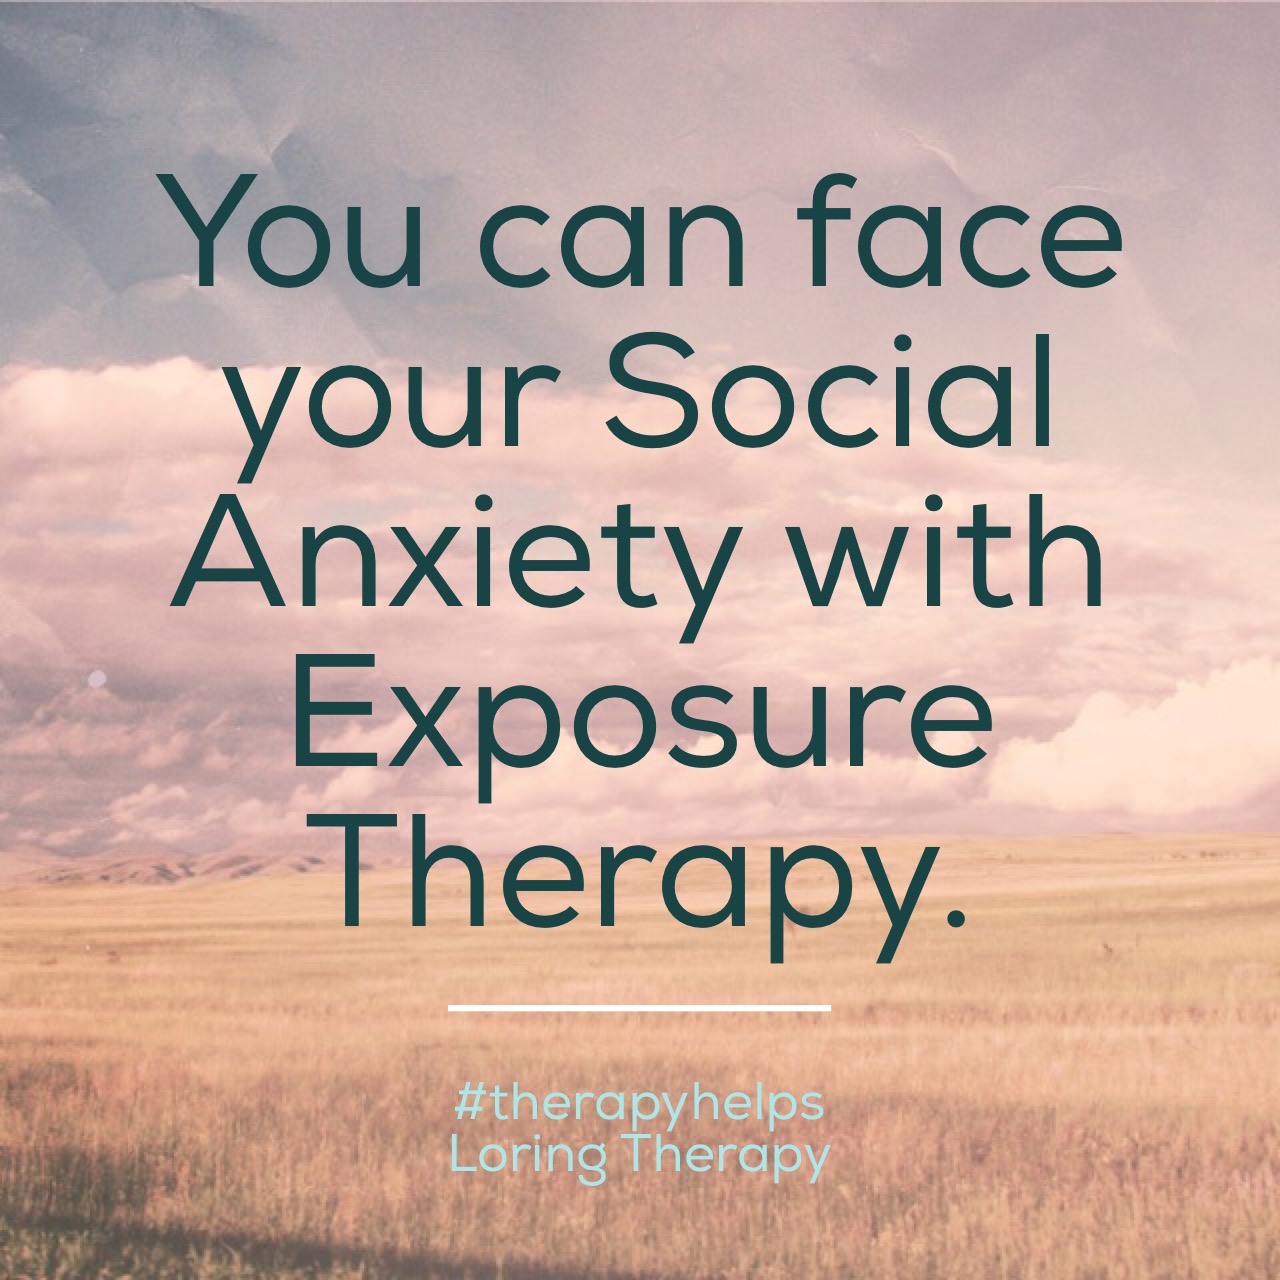 This Is Your Life - Therapy Can Help: You can face your Social Anxiety